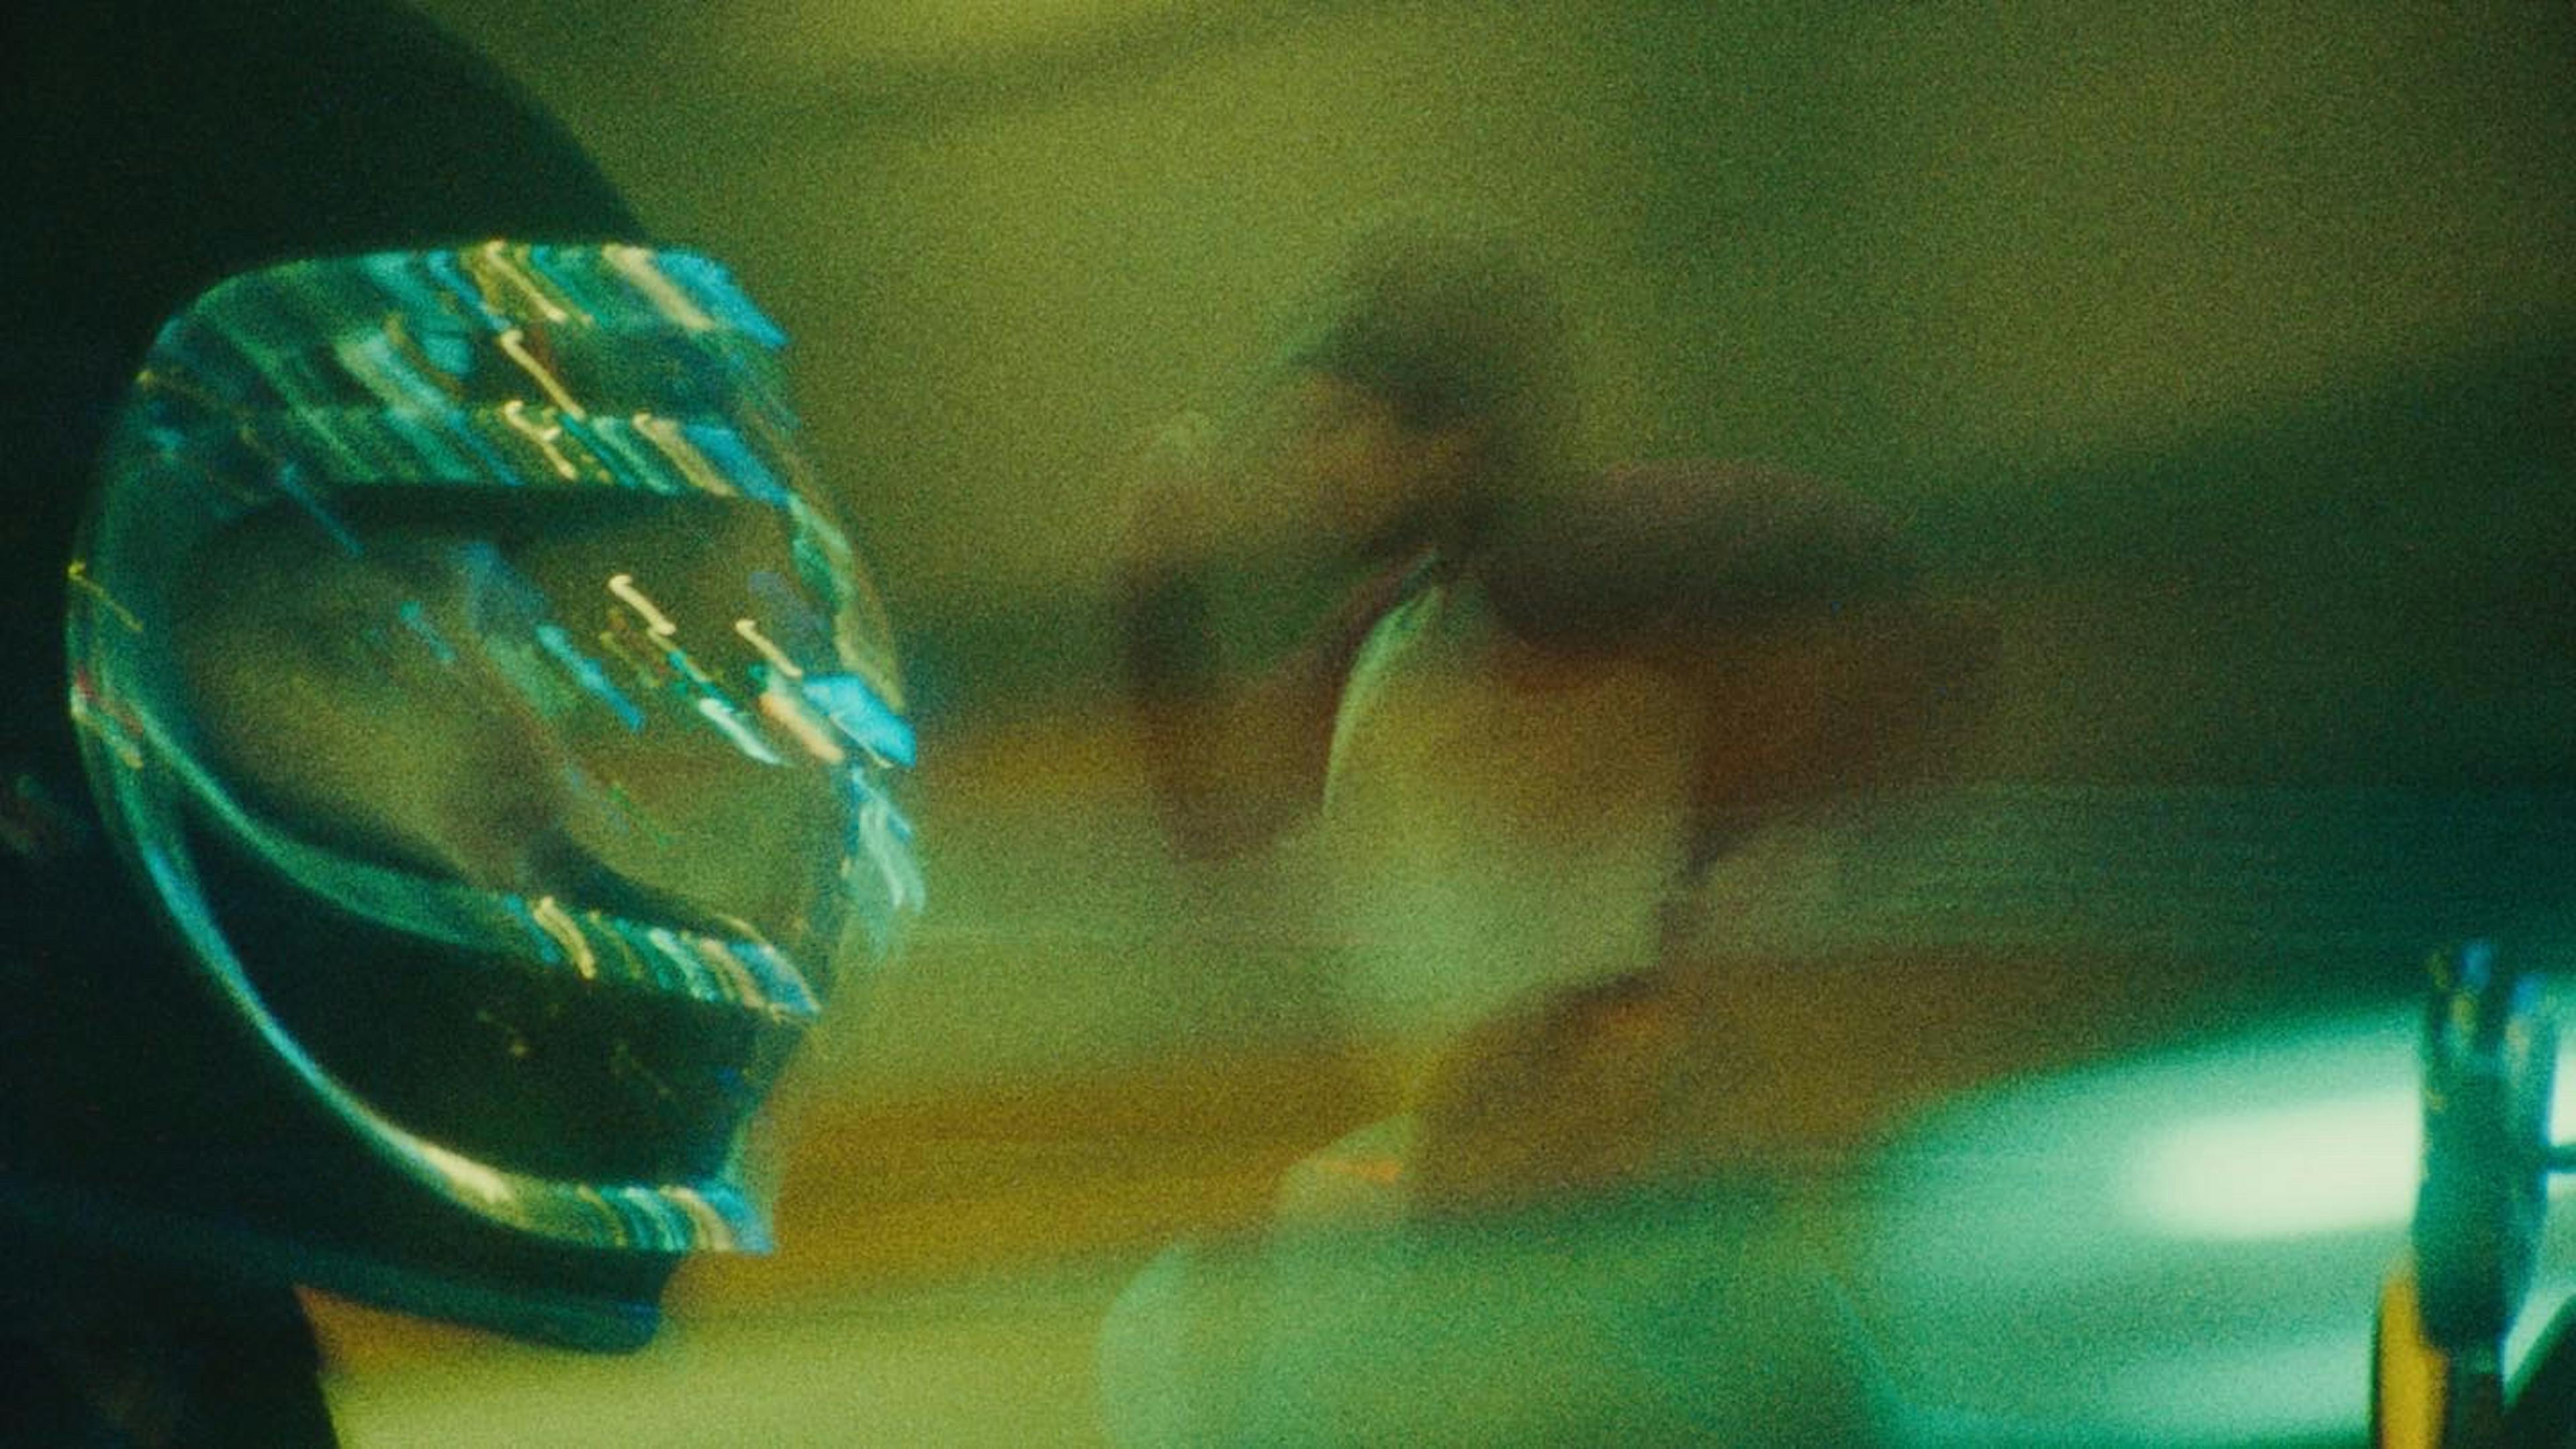 An abstract, motion-blurred photograph that captures a fleeting moment of action. In the foreground, a motorcycle helmet with a reflective blue visor is partially visible on the left, hinting at a sense of speed. To the right, the blurred silhouette of a person can be discerned, enveloped in a hazy, amber light that adds a mysterious quality to the image. The lighting and movement suggest a night scene, possibly on a city street, with the viewer getting just a glimpse of an urban adventure.